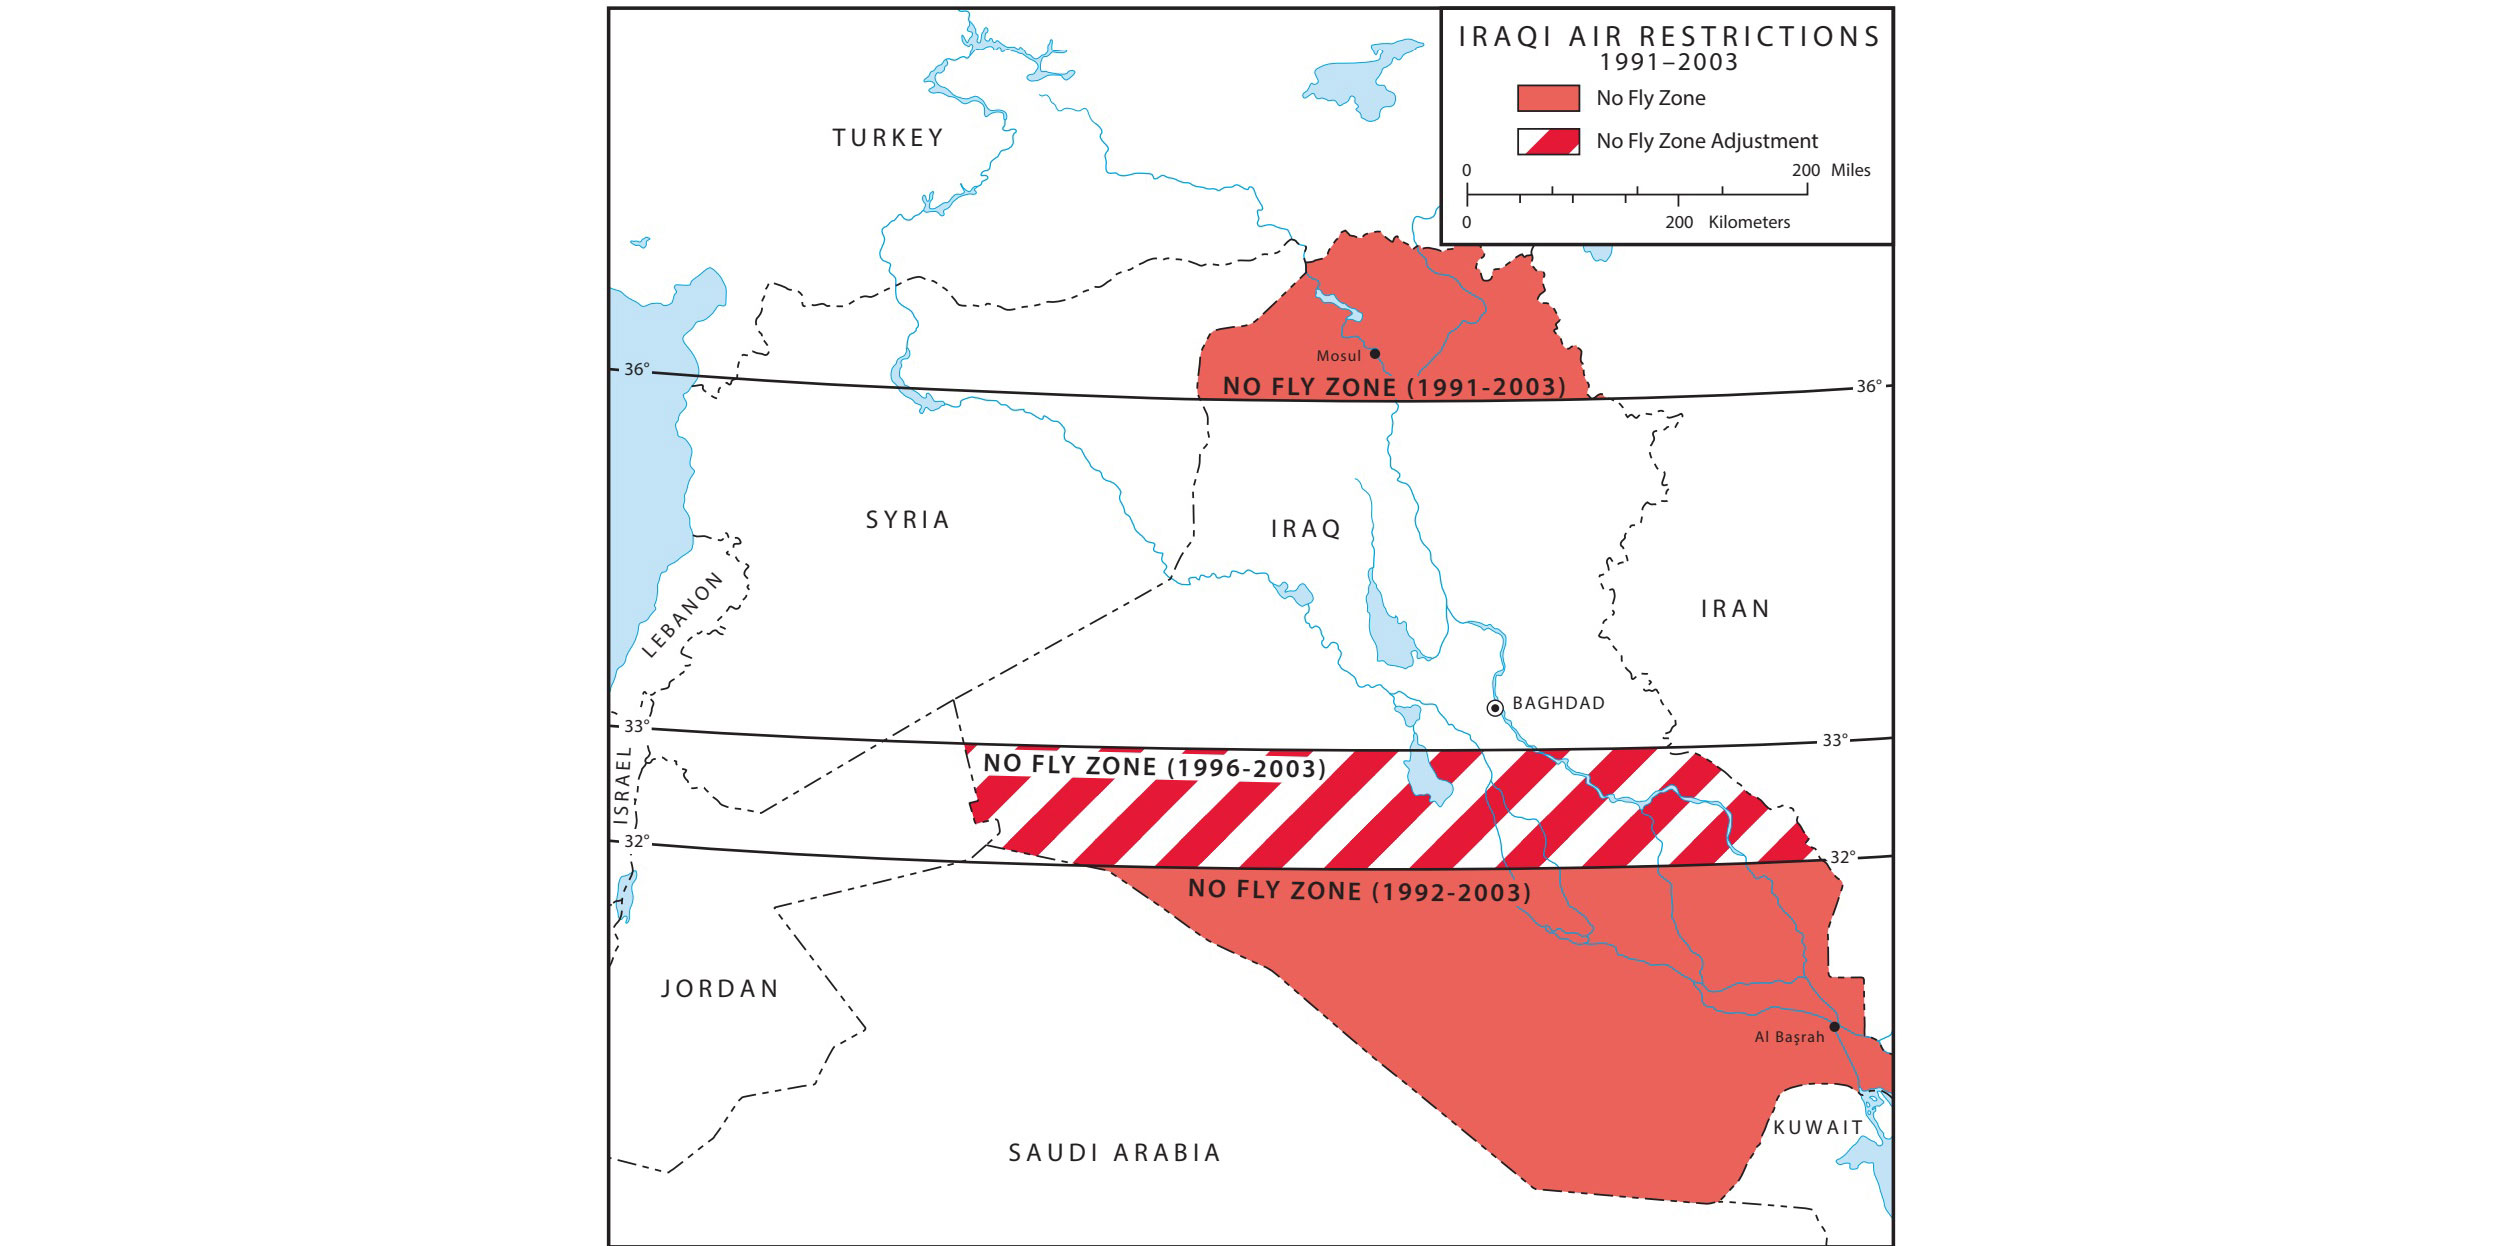 Map 1, Iraqi Air Restrictions 1991-2003